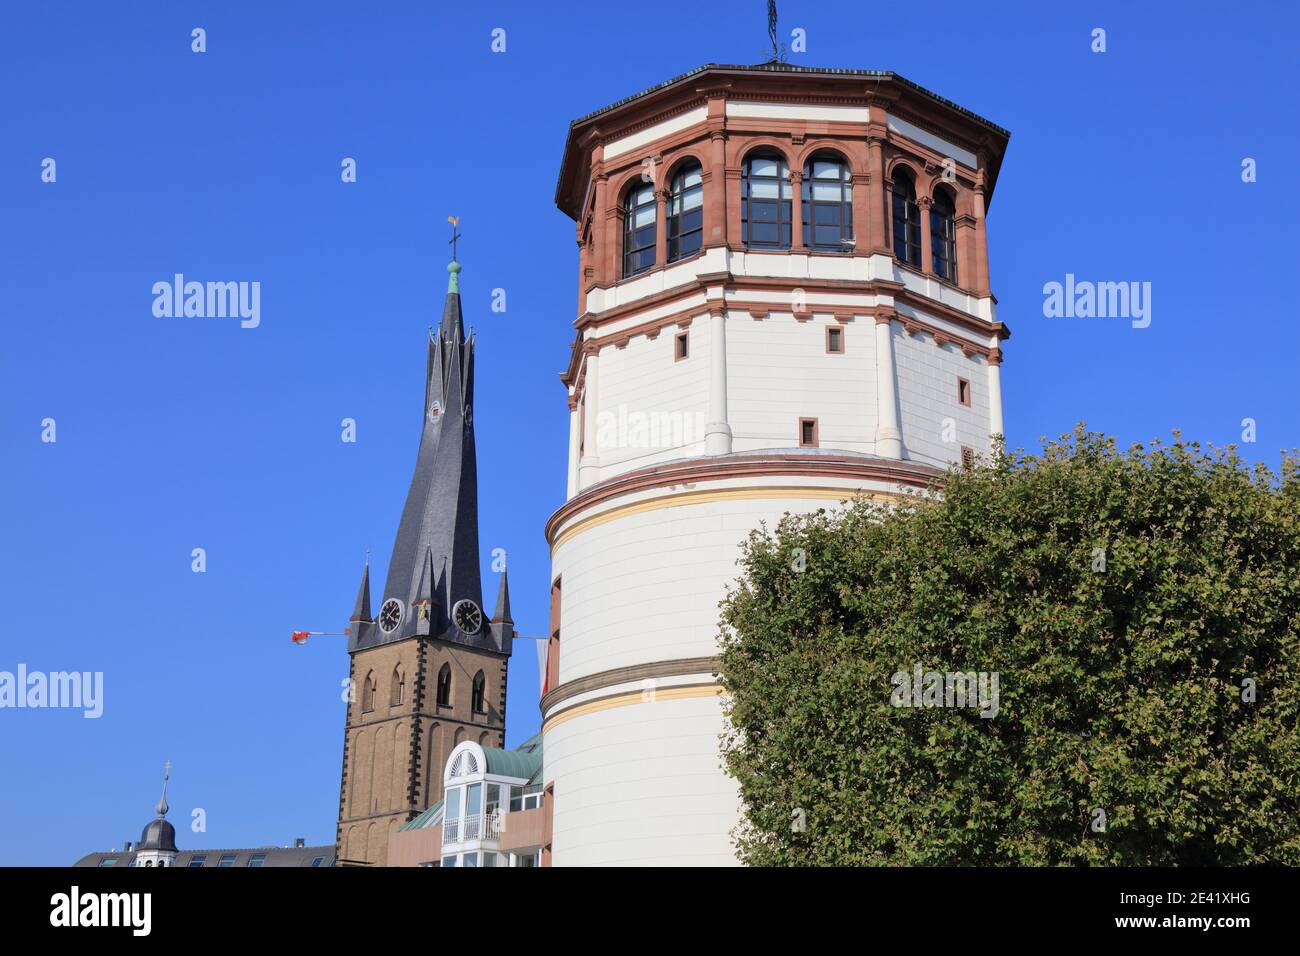 Skyline with St. Lambert Church and Old Castle Tower in Dusseldorf, Germany. Stock Photo